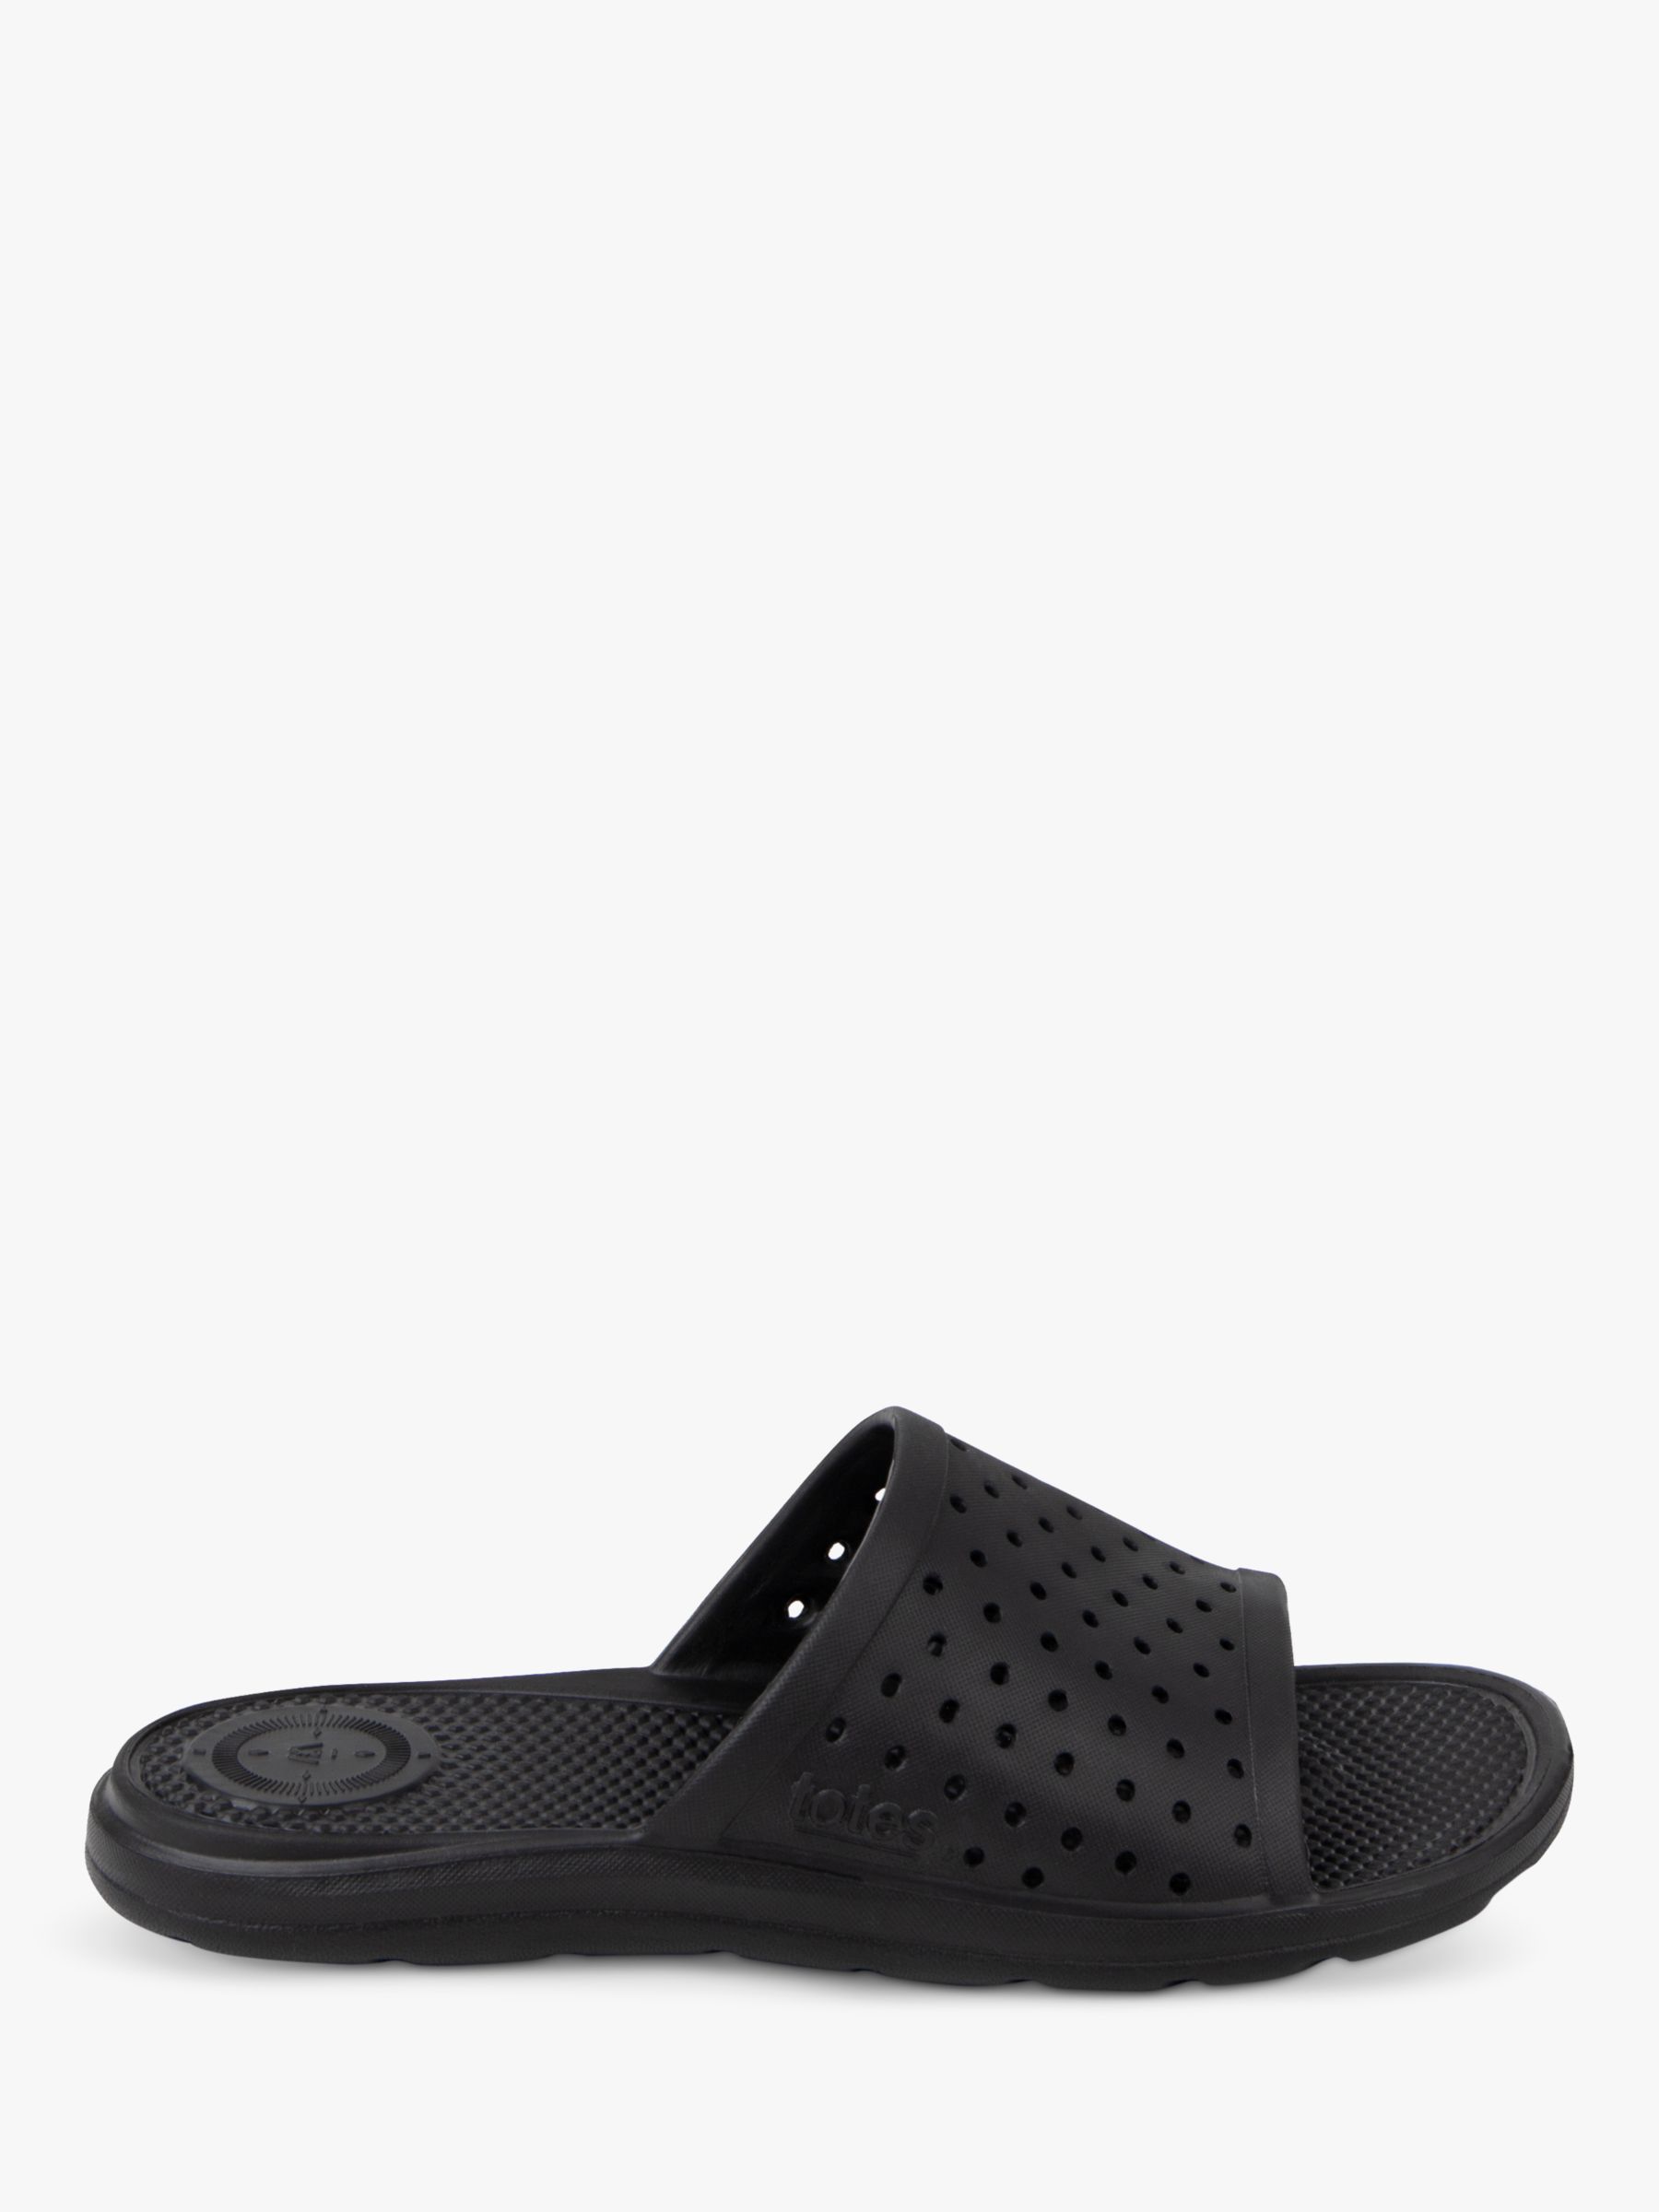 totes SOLBOUNCE Perforated Slider Sandals, Black at John Lewis & Partners